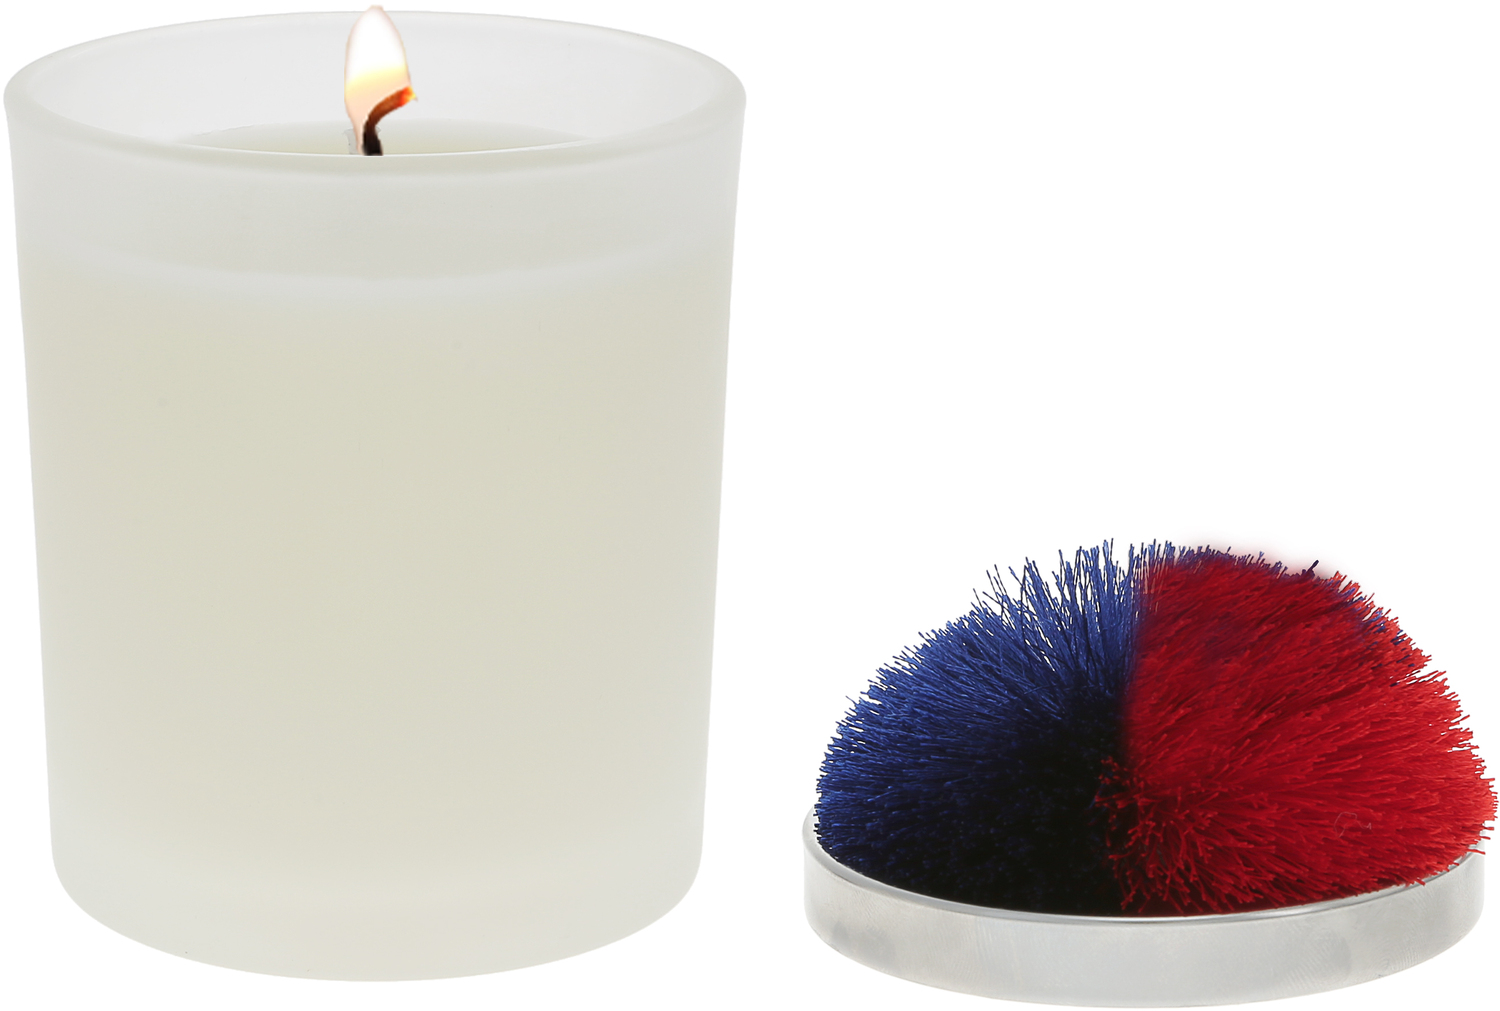 Blank - Red & Blue by Repre-Scent - Blank - Red & Blue - 5.5 oz - 100% Soy Wax Candle with Pom Pom Lid
Scent: Tranquility